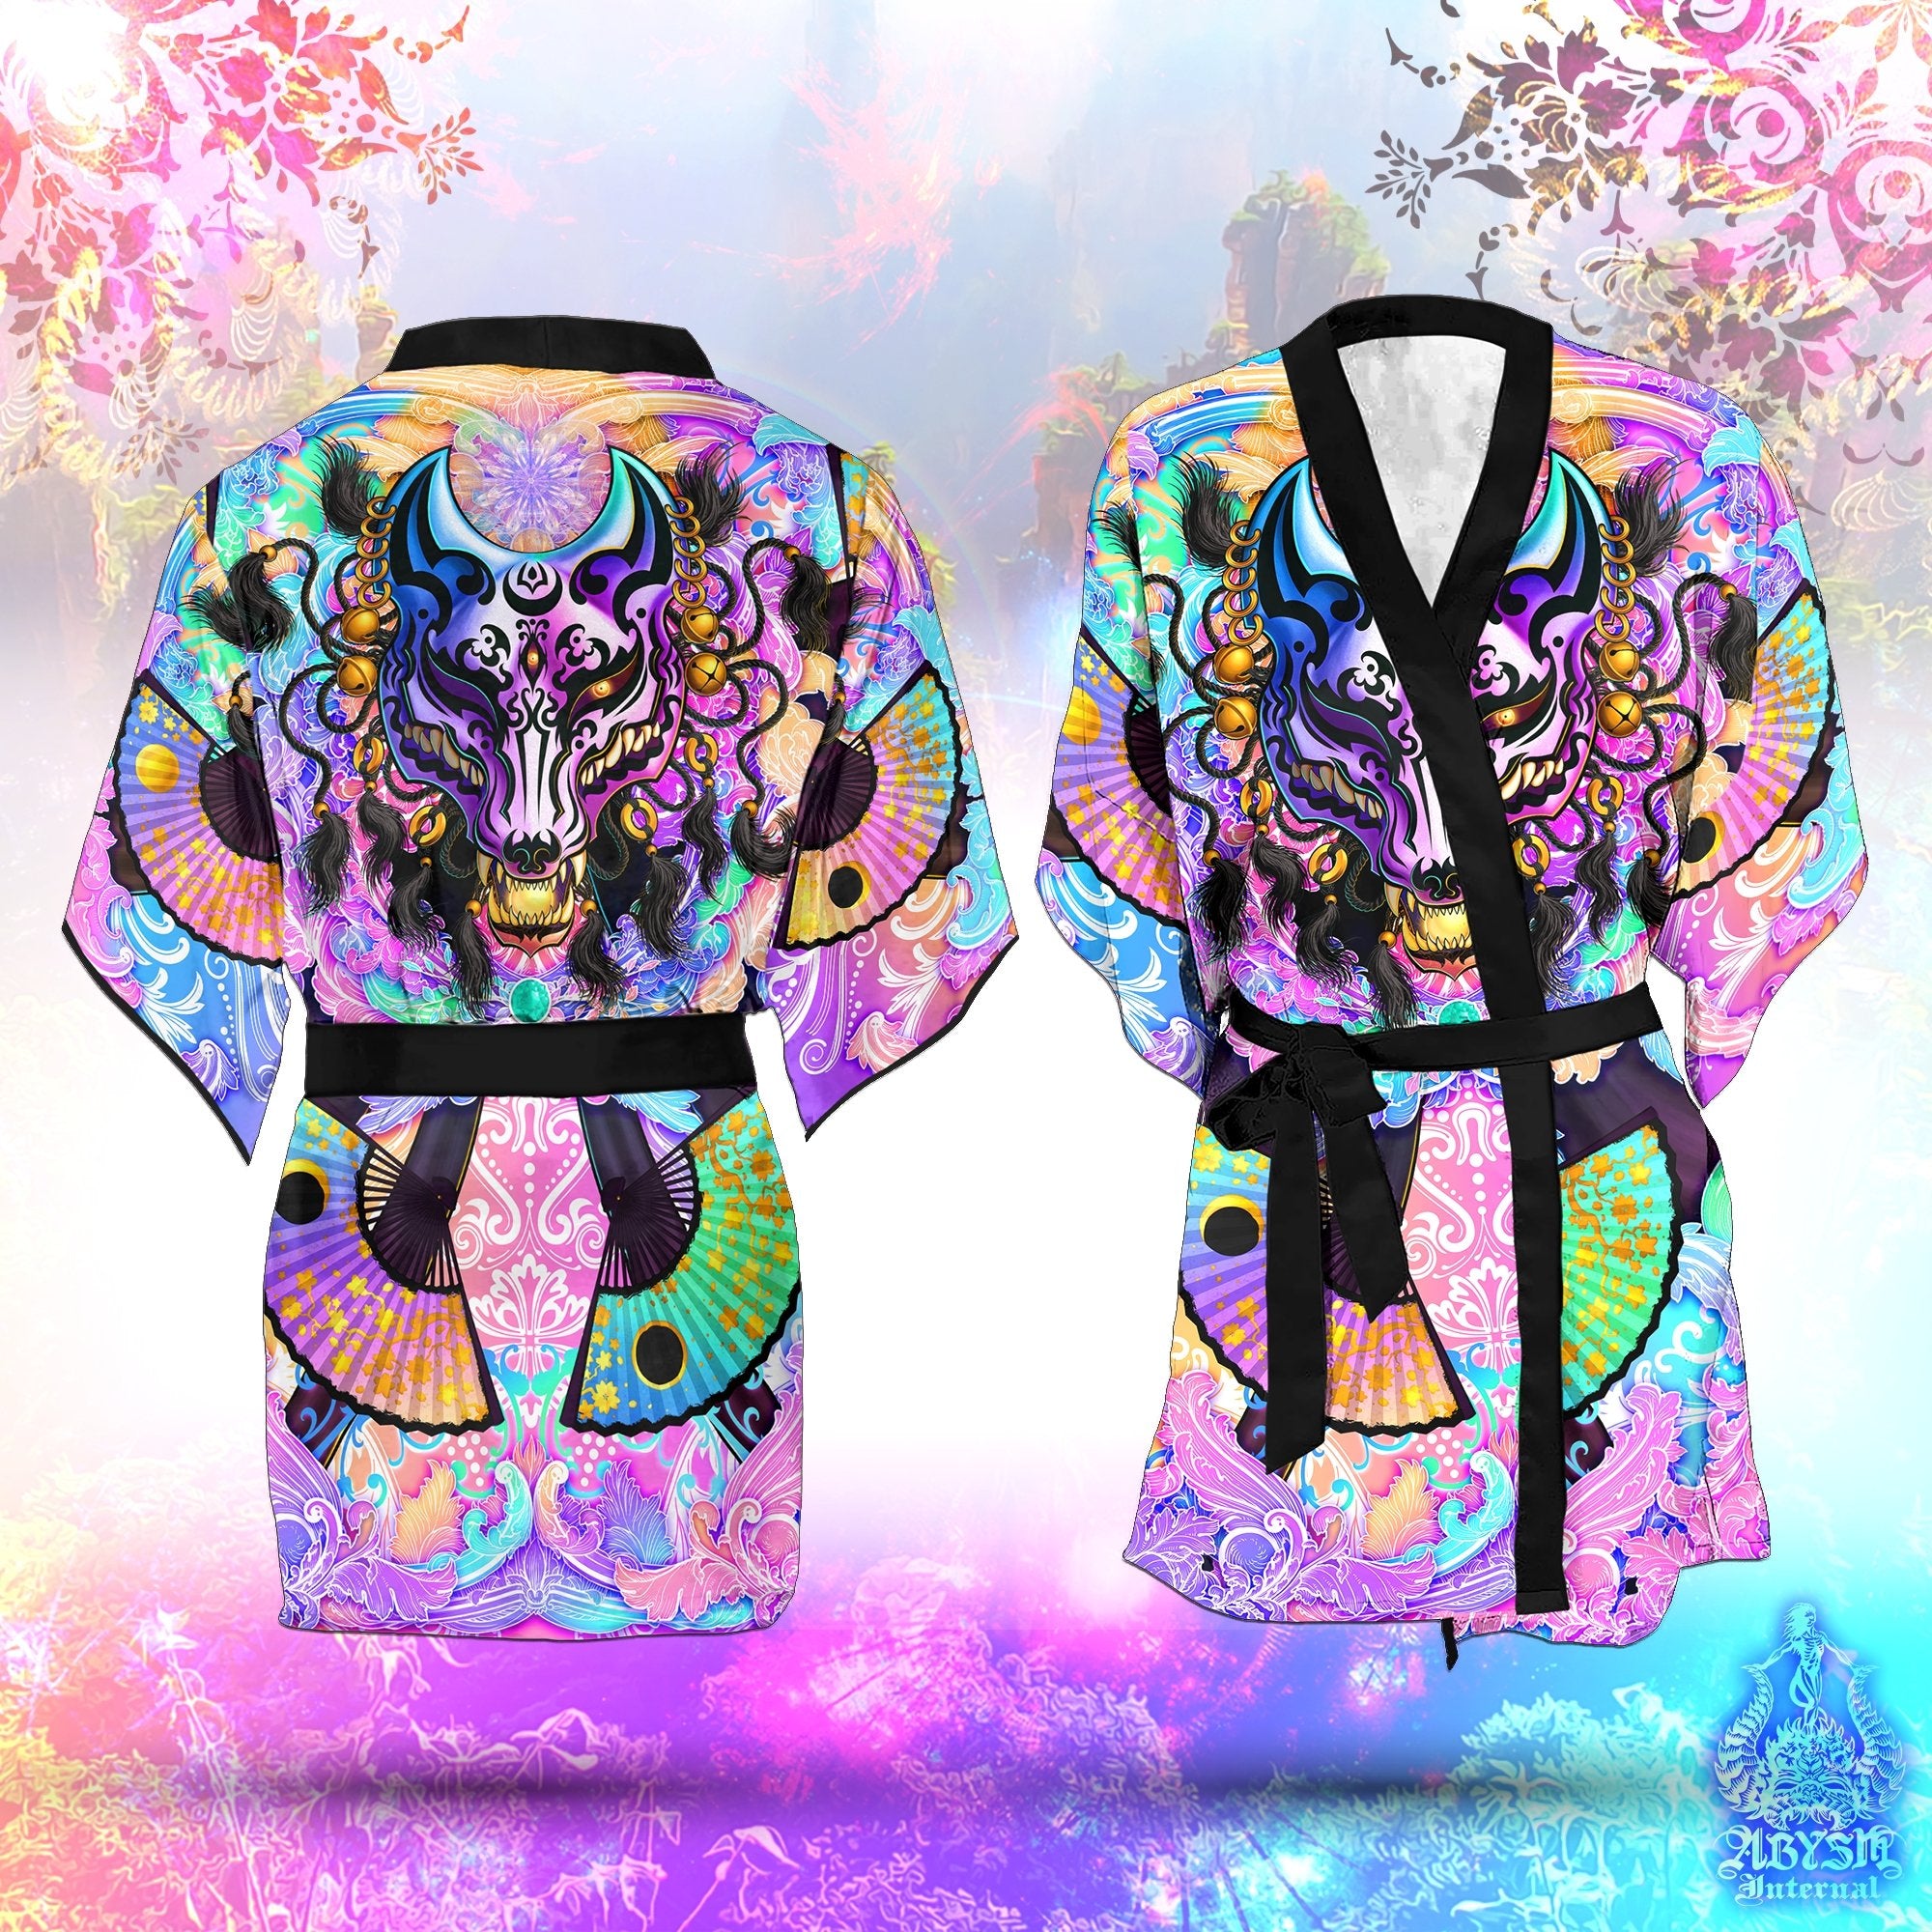 Kitsune Cover Up, Beach Rave Outfit, Japanese Party Kimono, Summer Festival Robe, Indie and Alternative Clothing, Unisex - Fox Mask, Holographic Pastel Punk Black - Abysm Internal